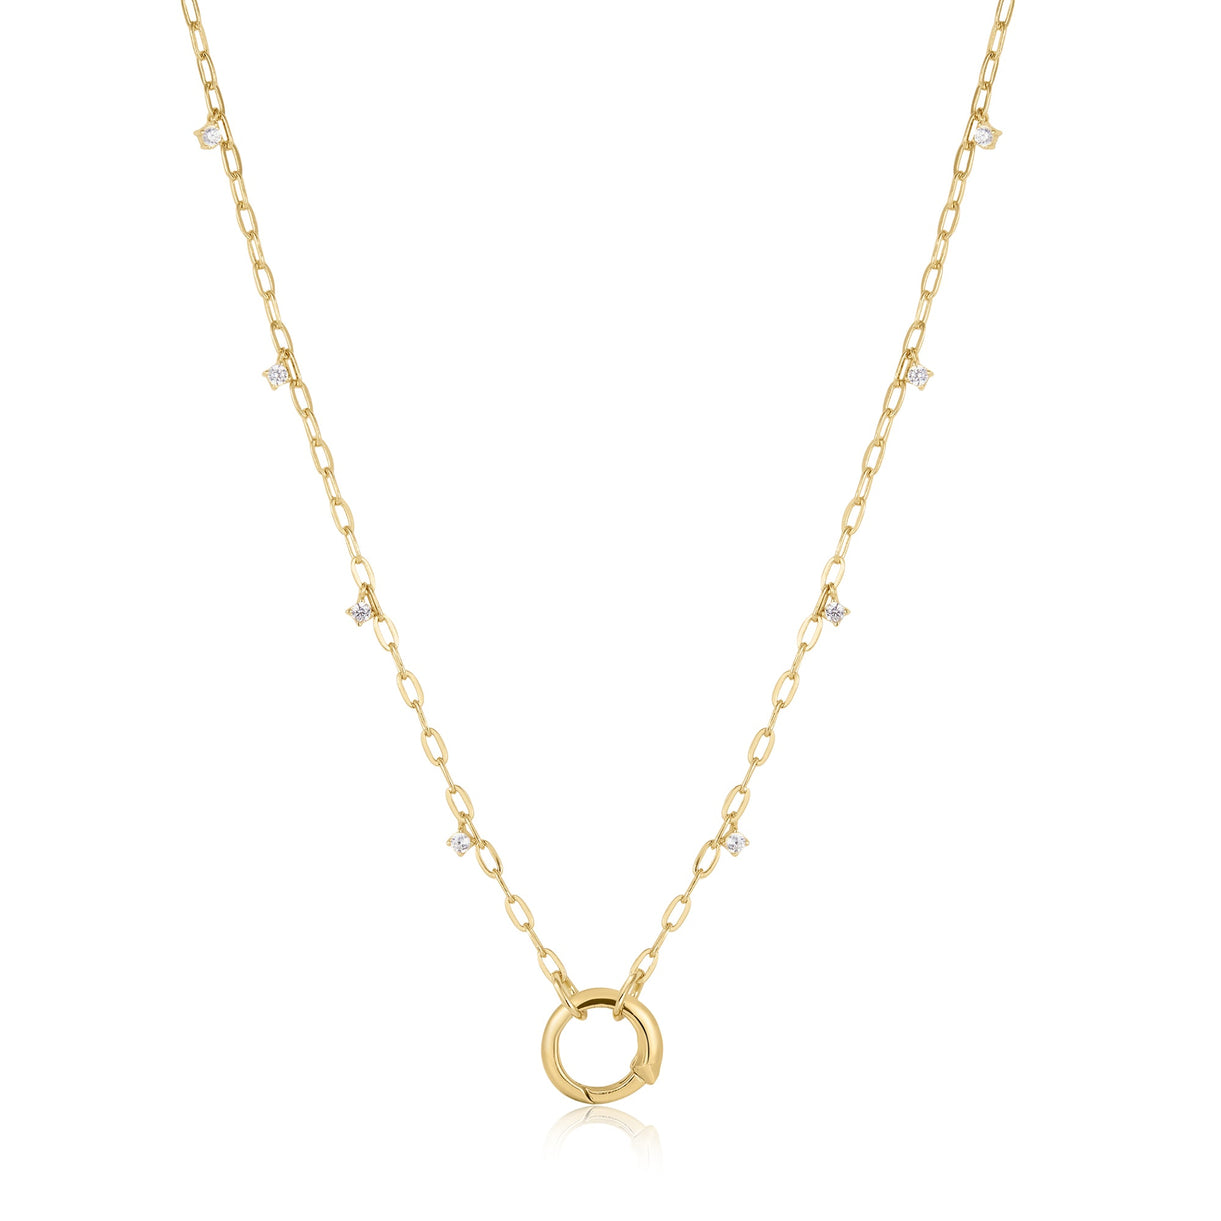 Gold Shimmer Chain Charm Connector Necklace